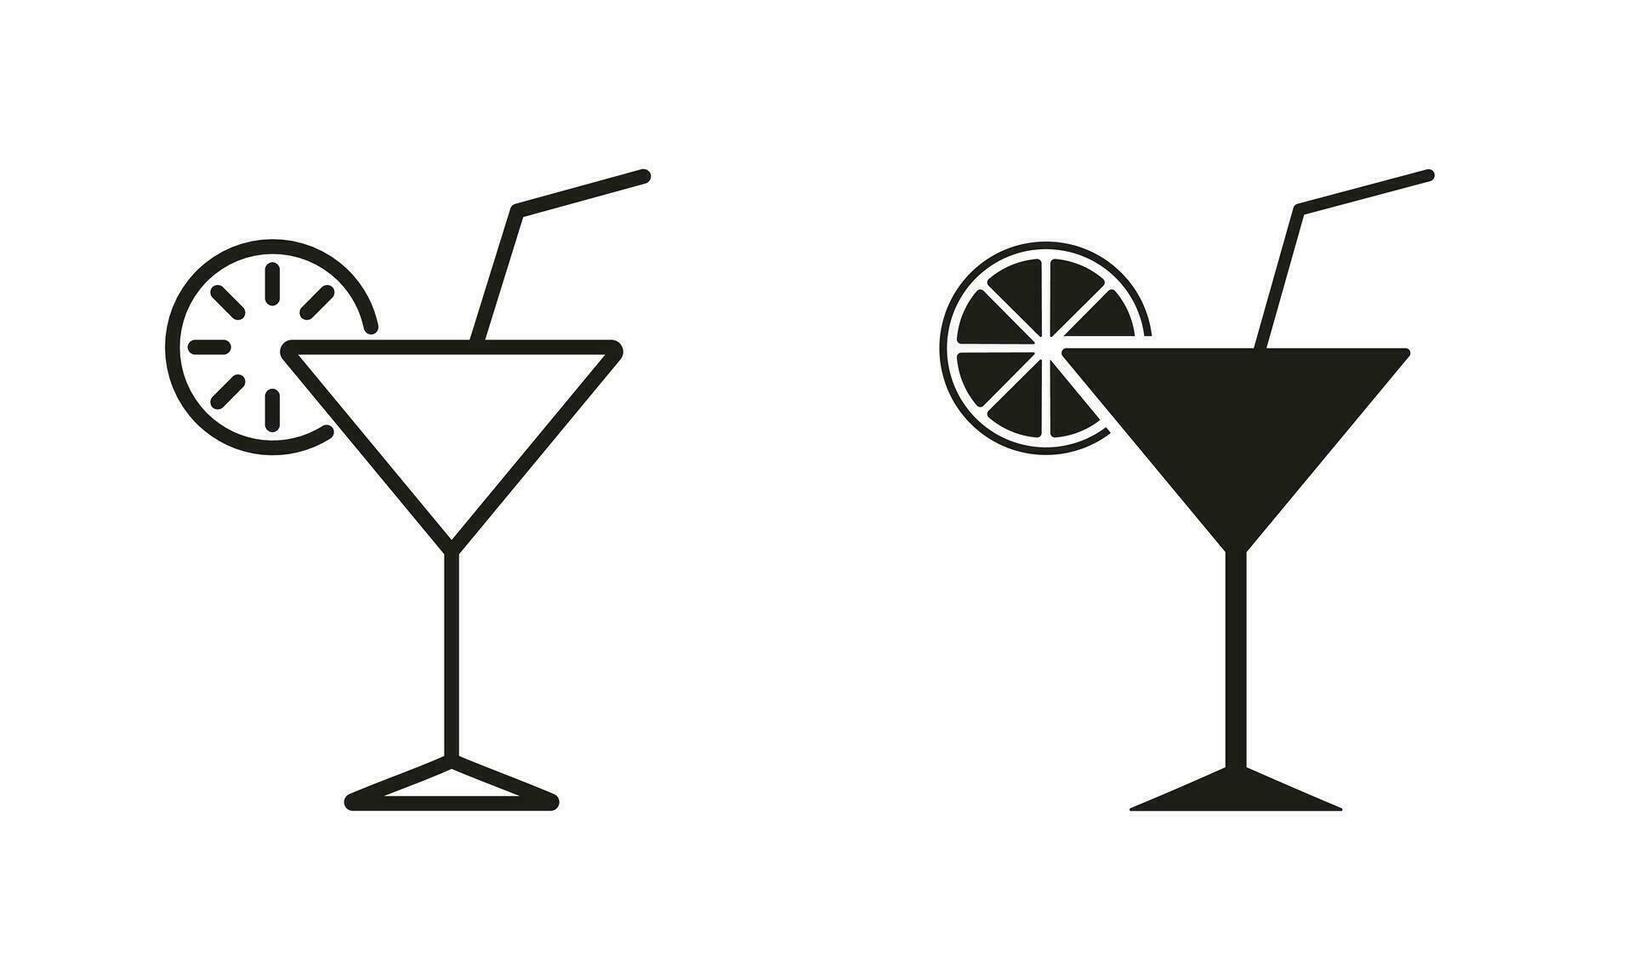 Cocktail Margarita Line and Silhouette Icon Set. Tropical Coctail. Ice Summer Cocktail Glass with Straw and Lime Sign. Drink Martini, Liquor, Vodka, Champagne Pictogram. Isolated Vector Illustration.